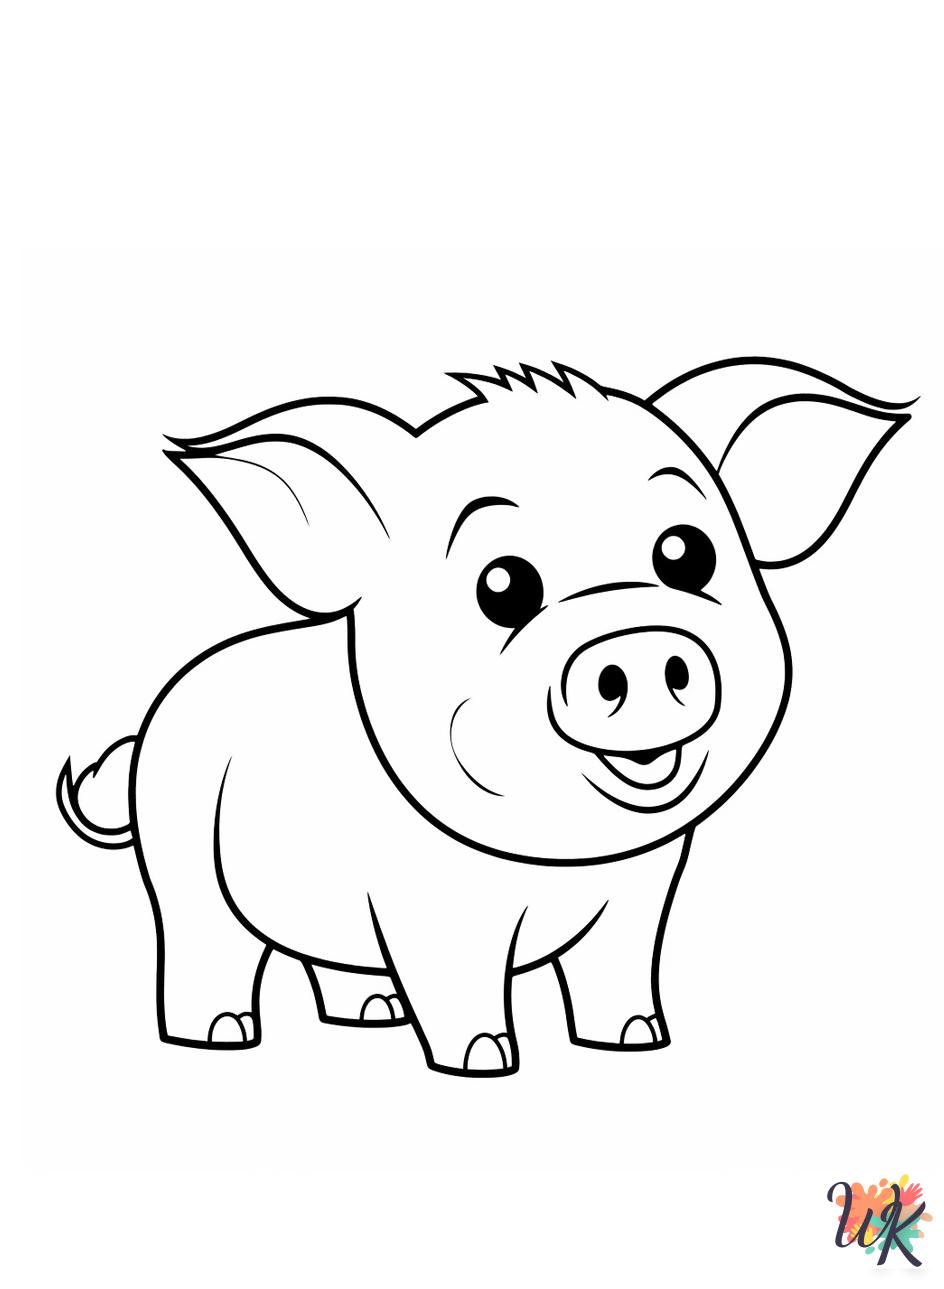 Pigs free coloring pages 2